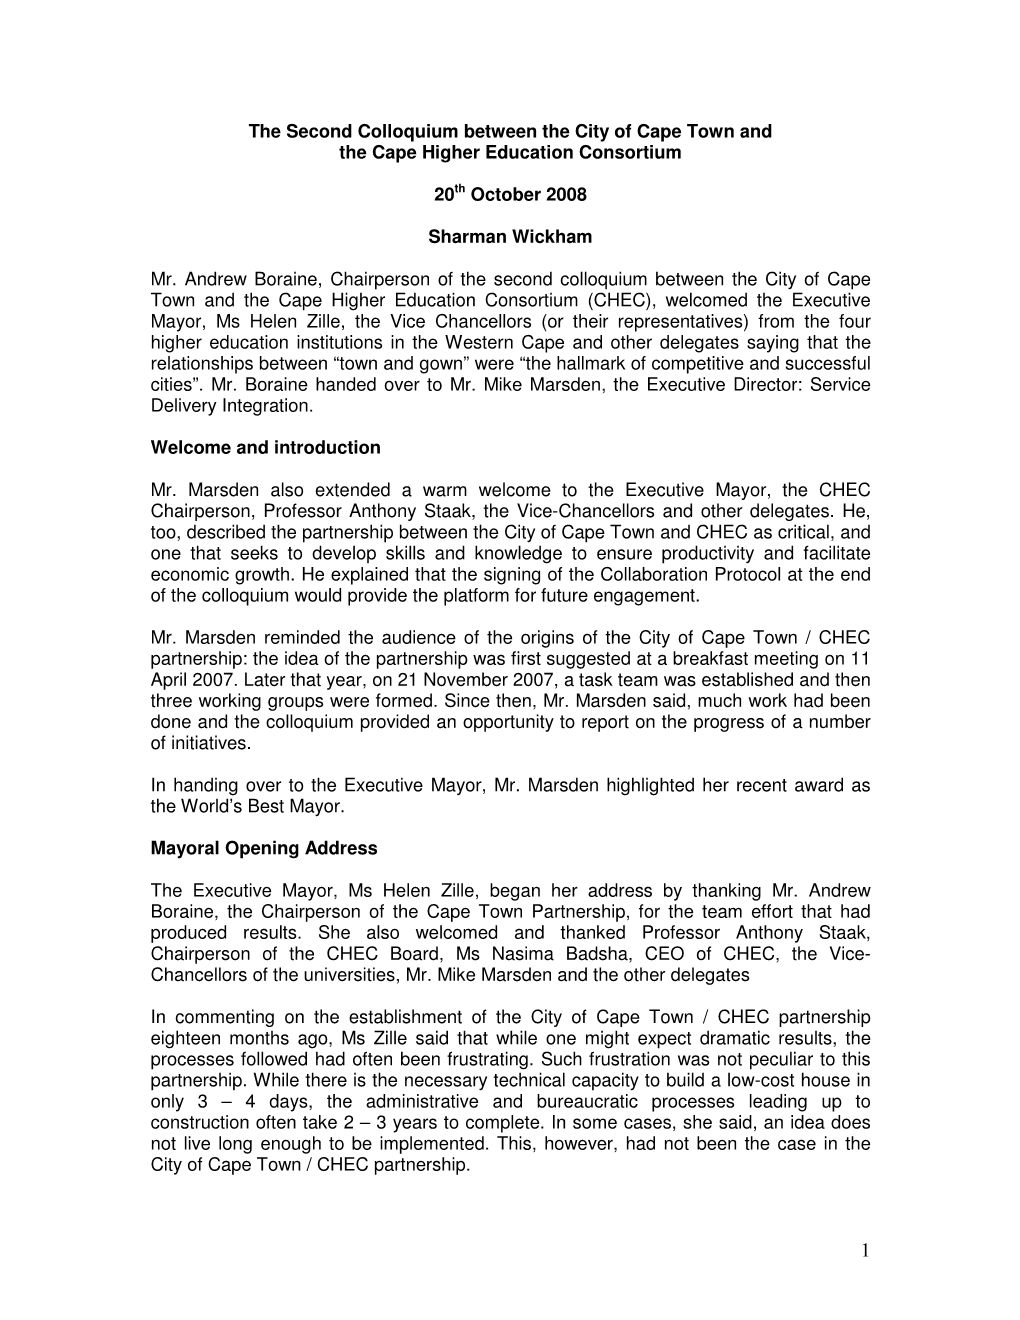 Report on CHEC and City of Cape Town Colloquium, 2007, Sharman